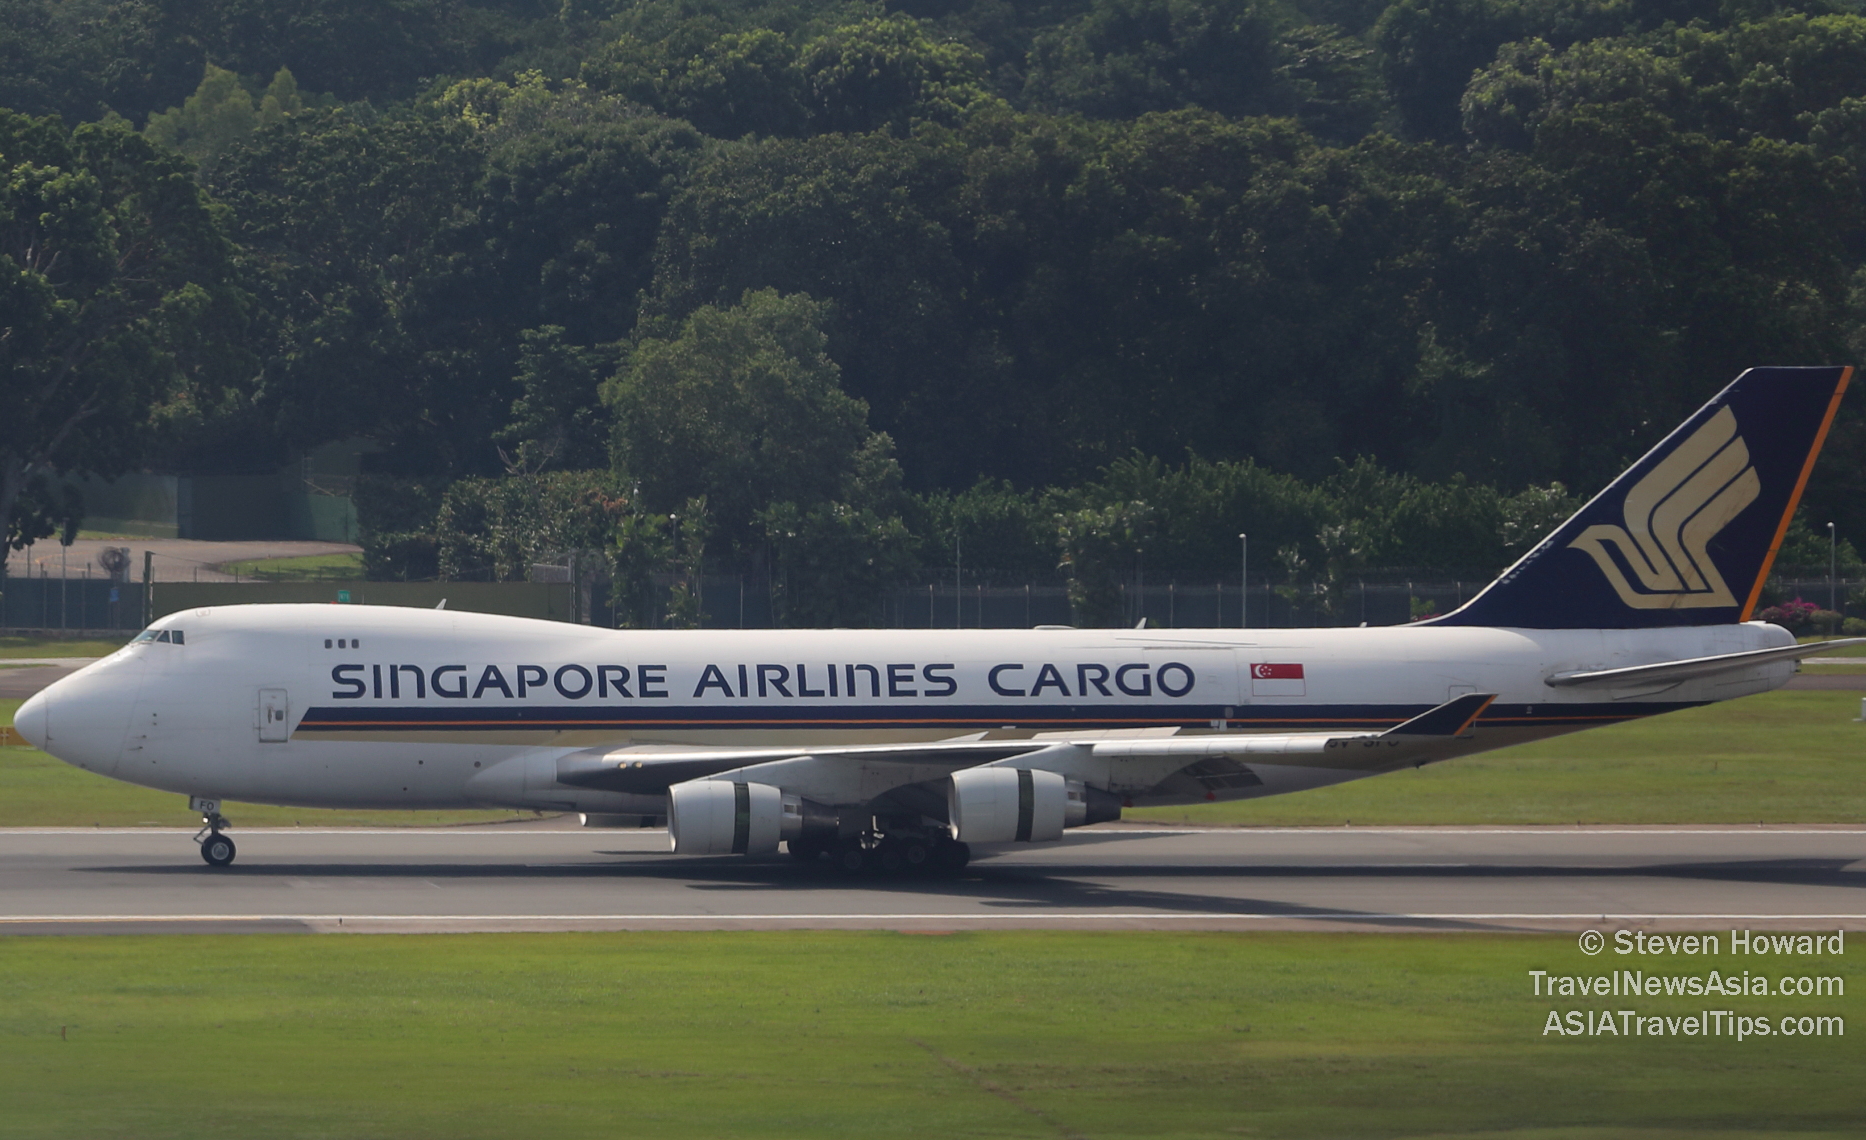 Singapore Airlines Cargo B747F. Picture by Steven Howard of TravelNewsAsia.com Click to enlarge.